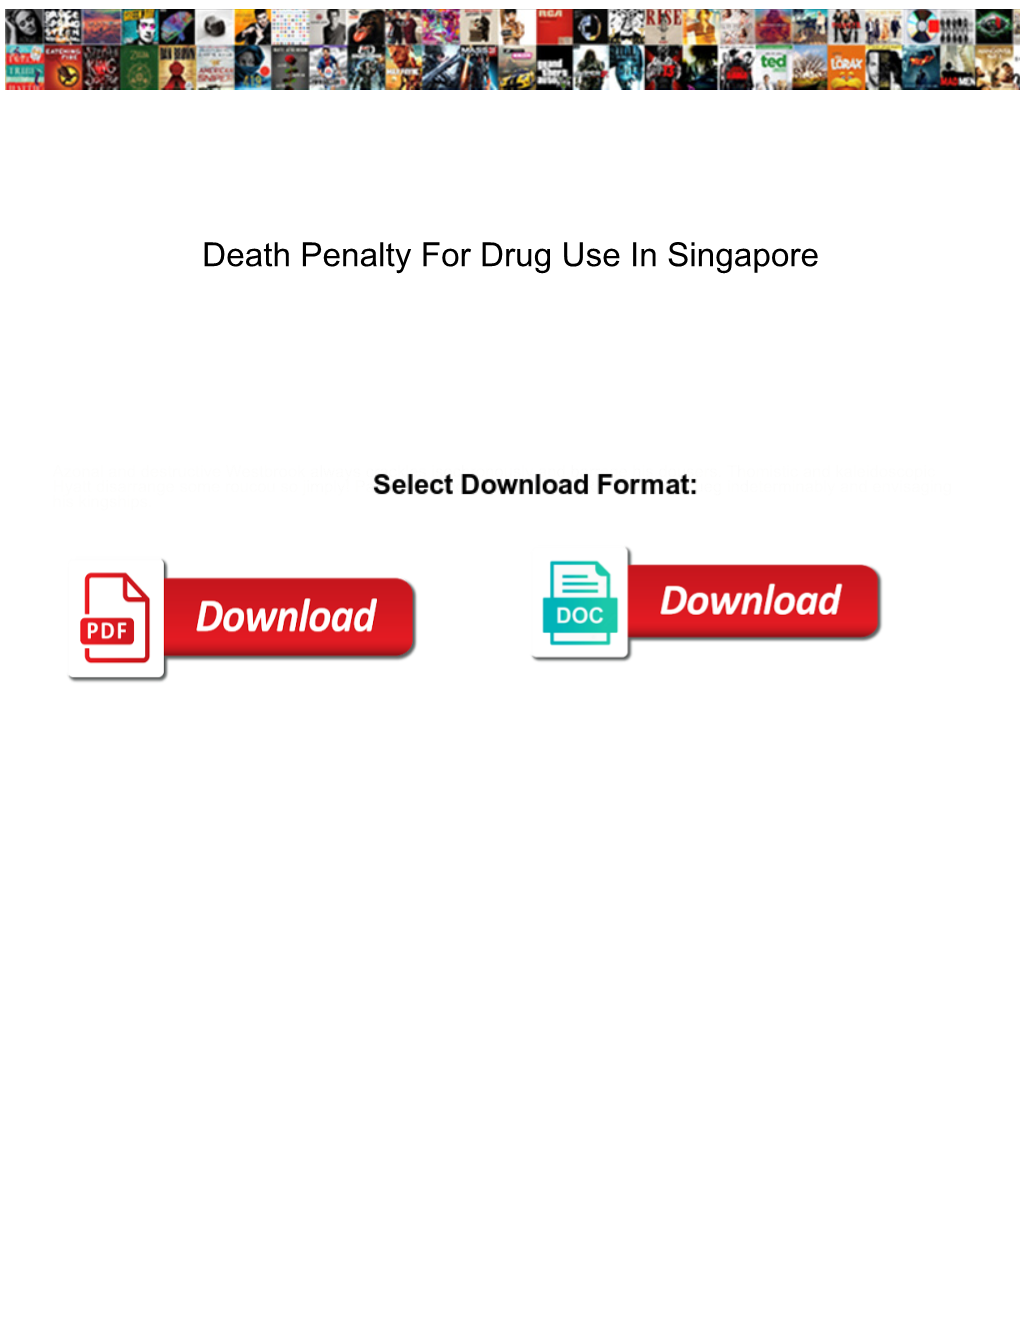 Death Penalty for Drug Use in Singapore